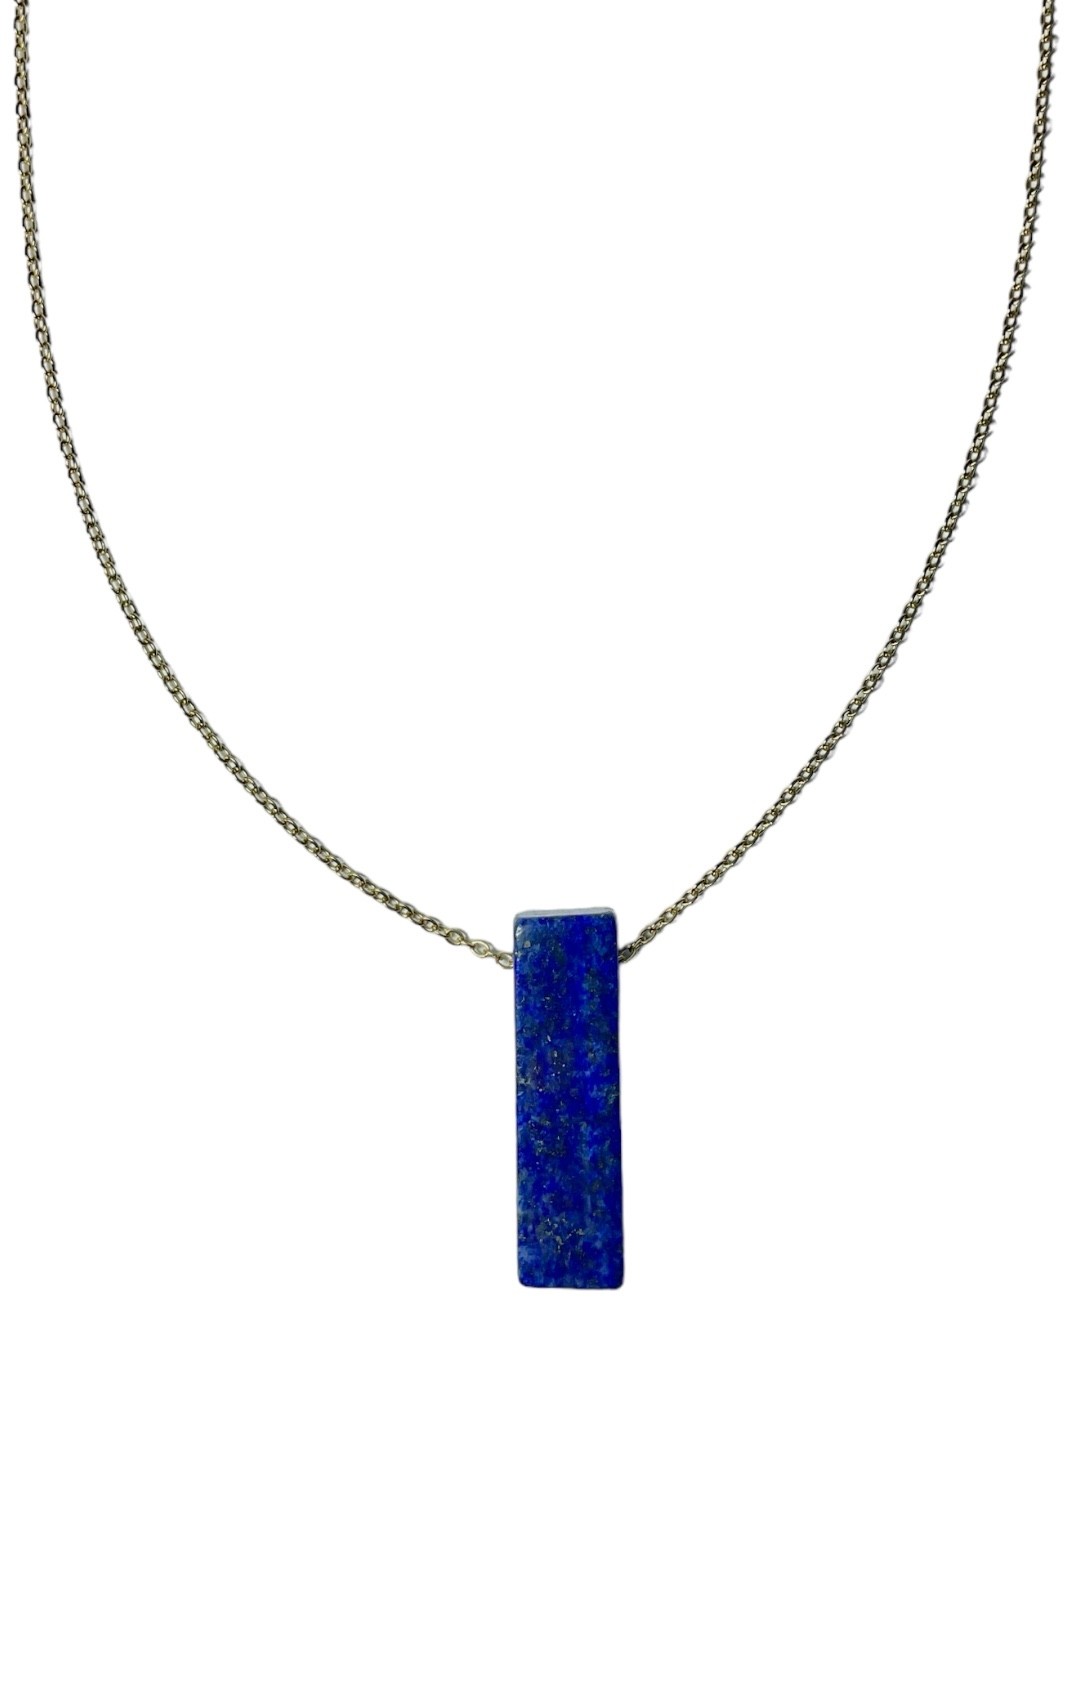 Lapis lazuli,18k gold plated natural stone necklace on steel